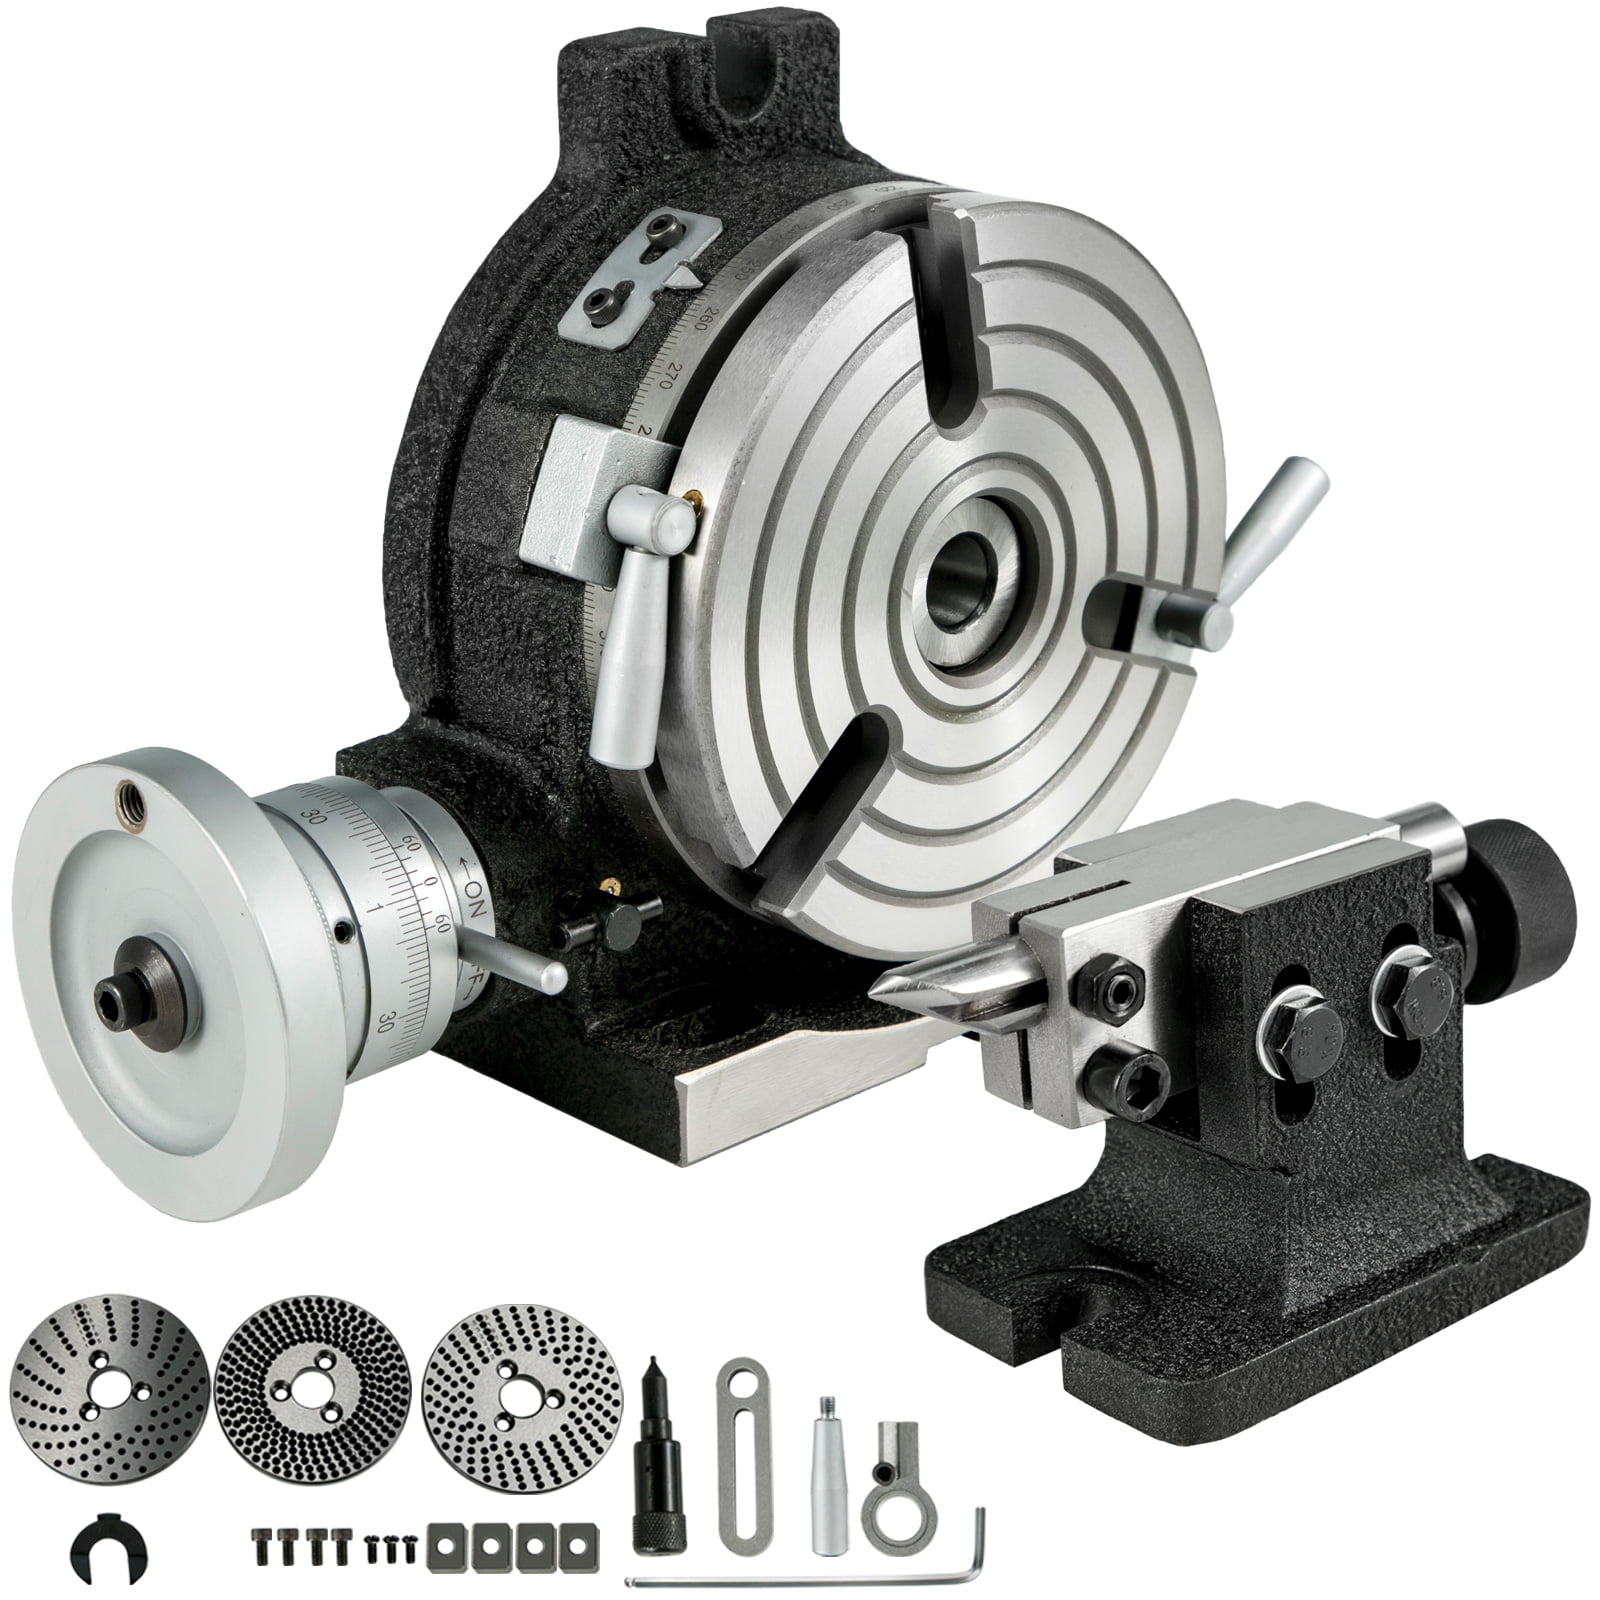 100 mm Rotary Milling Indexing Table with 3 xM6 T-nut 100 mm Round Vice For 4" 